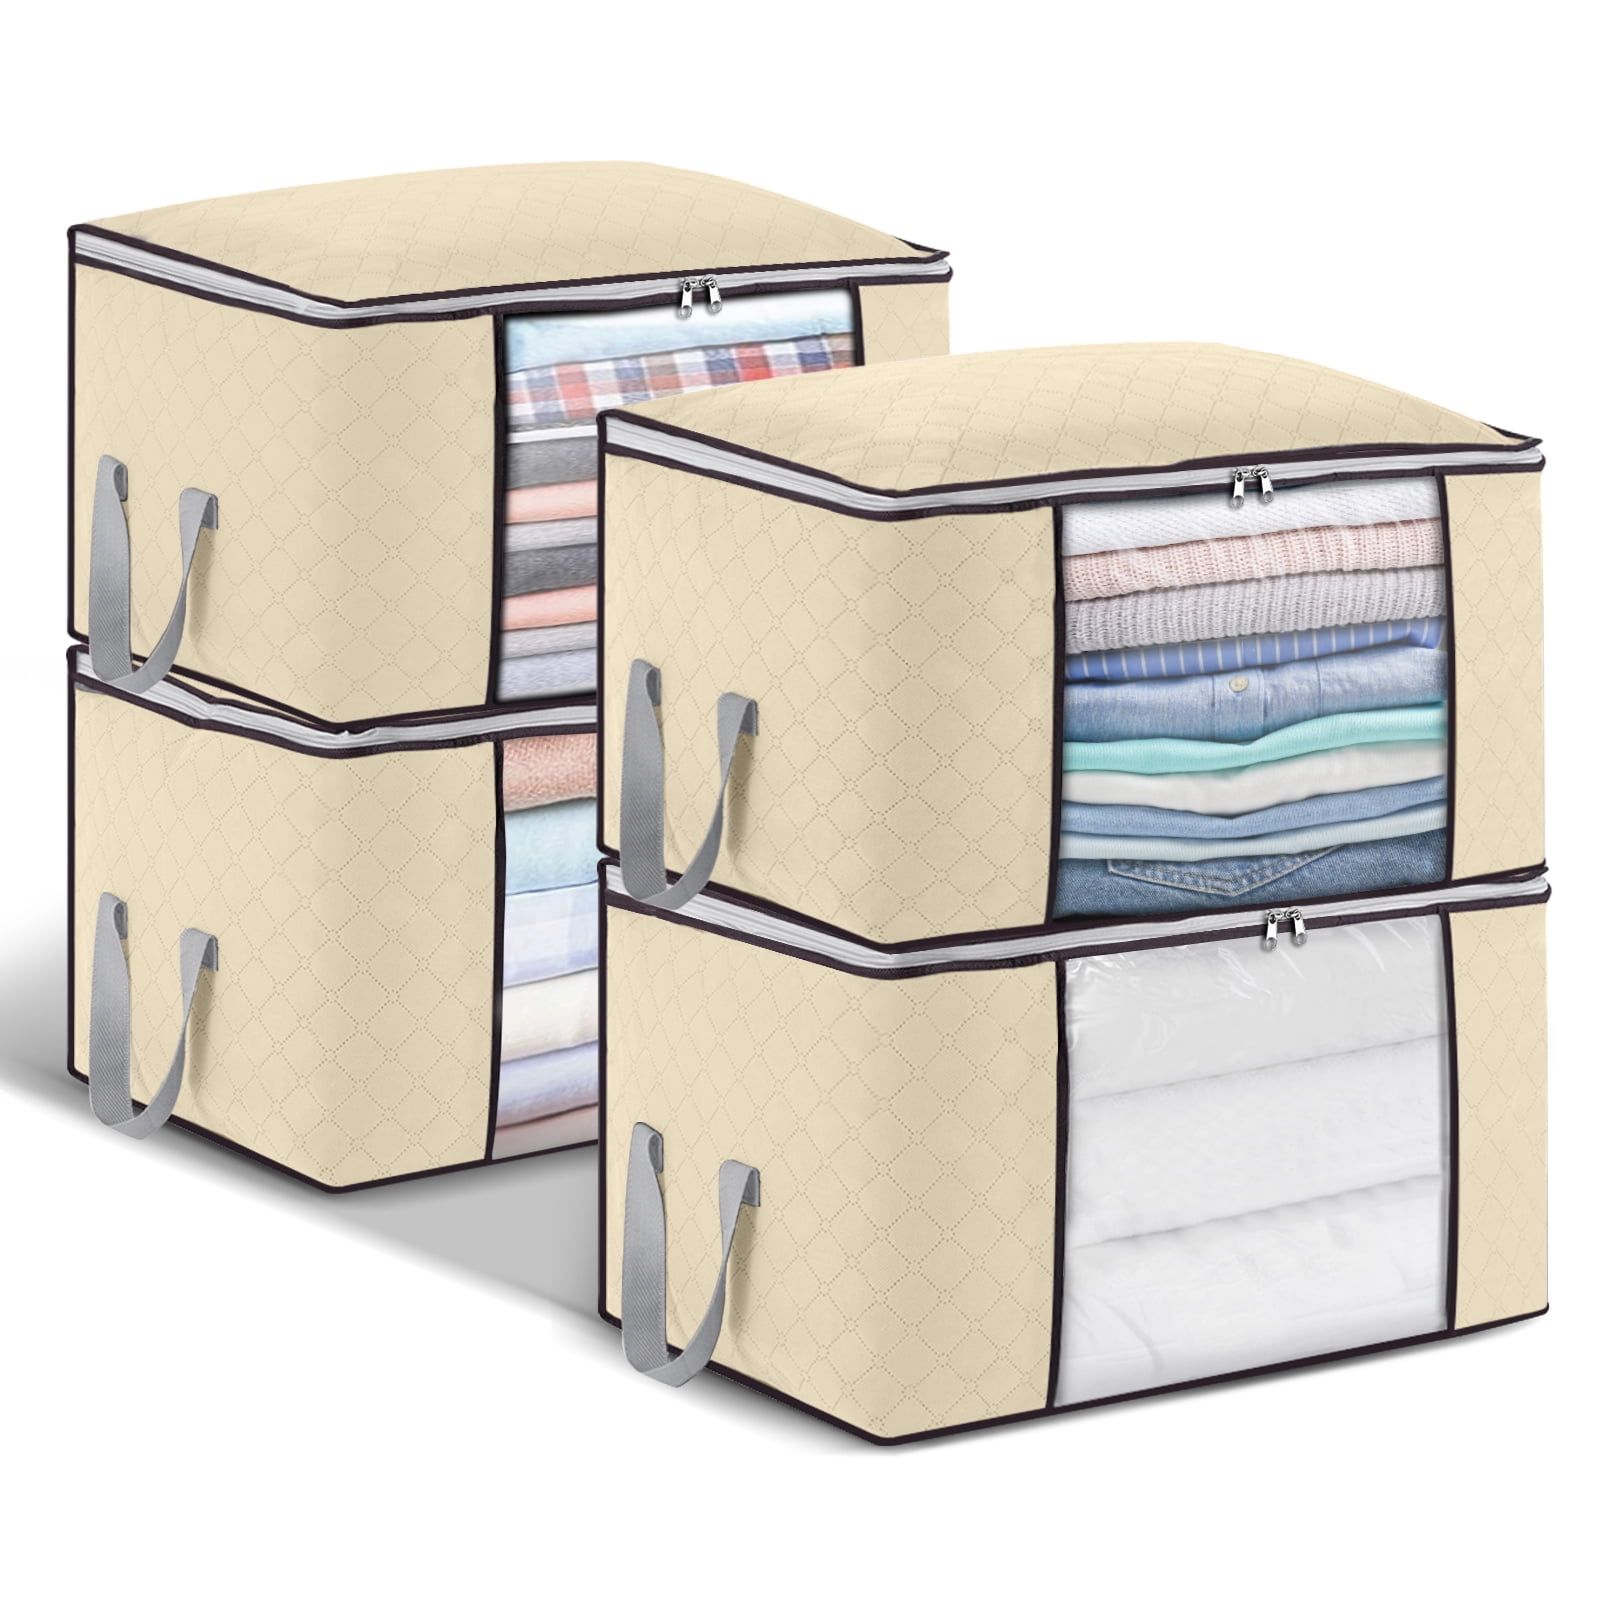 Travelwant Storage Bags Large Blanket Clothes Organization and Storage Containers for Bedding, Comforters, Foldable Organizer with Reinforced Handle